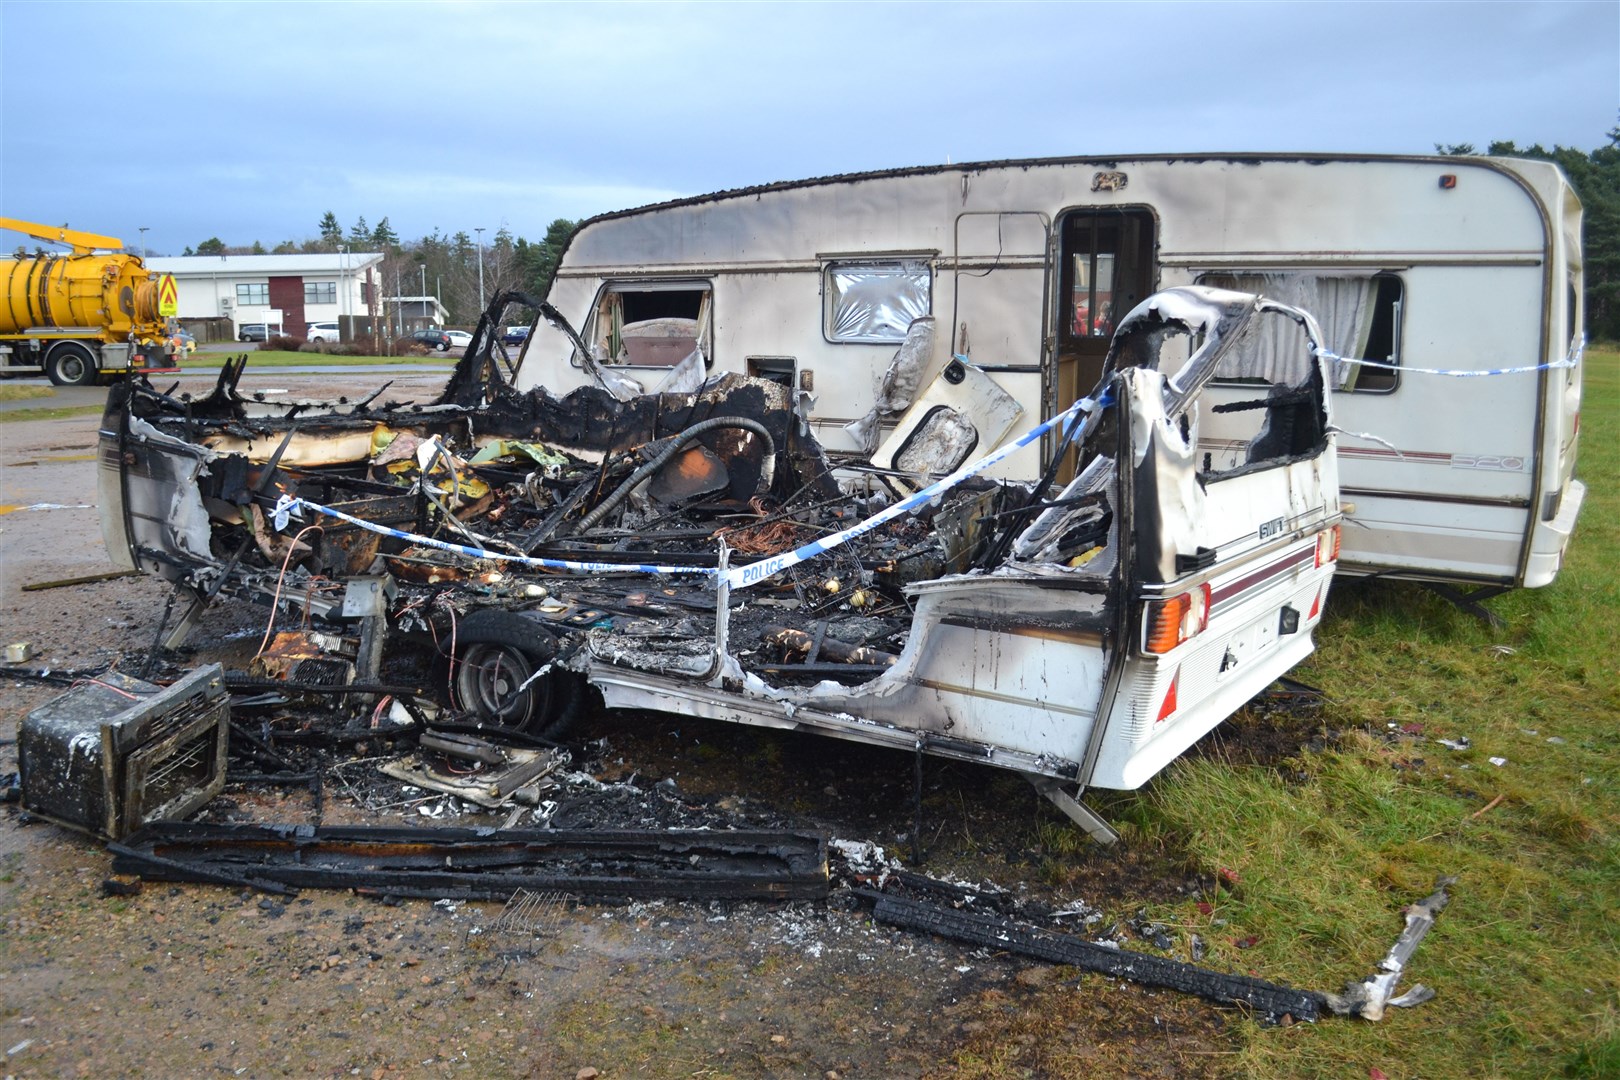 One of the caravans has been completely destroyed by the blaze. Picture: Tyler McNeill